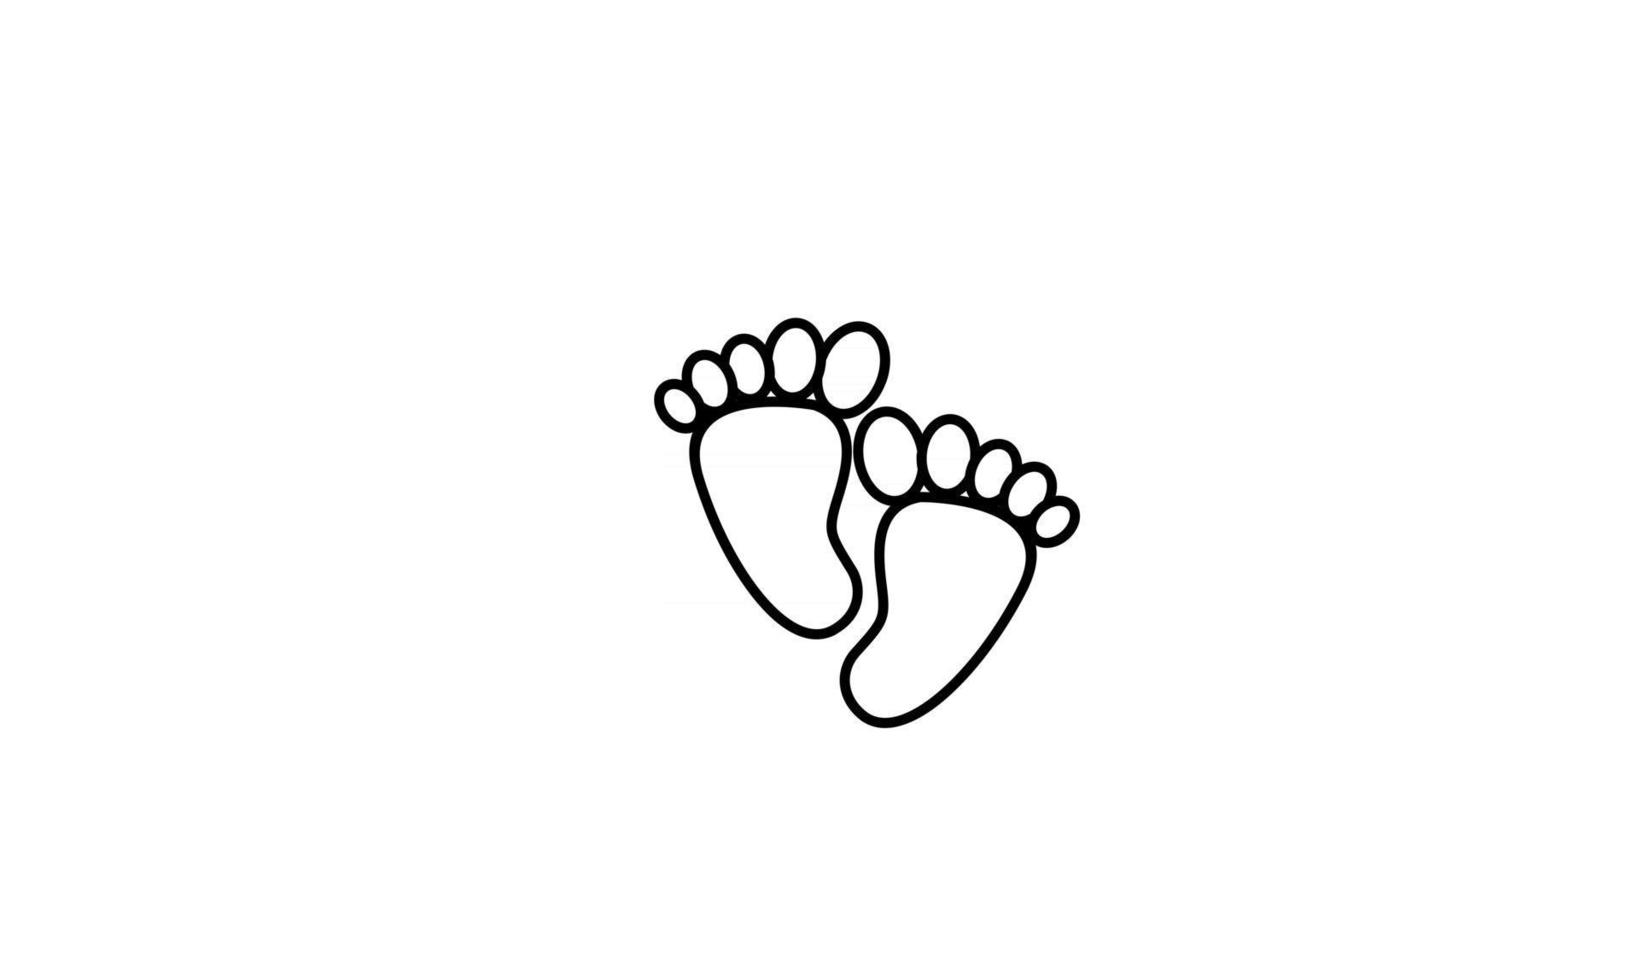 barefoot Footprint step line icon simple design vector